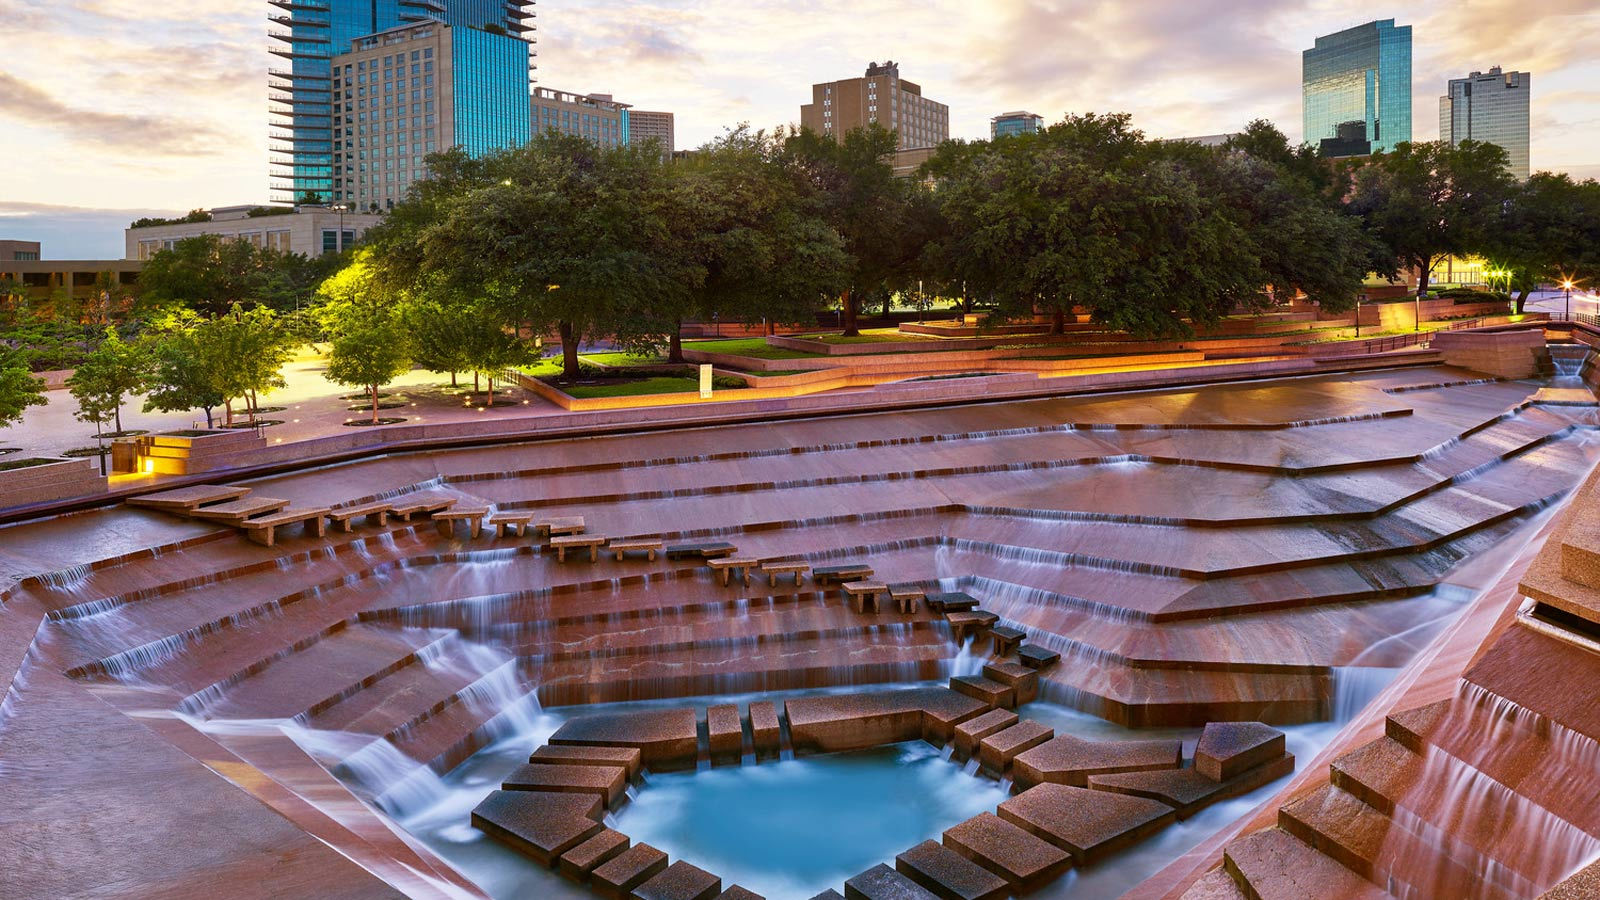 7) Fort Worth Water Gardens 1502 Commerce St, Fort Worth, TX 76102.